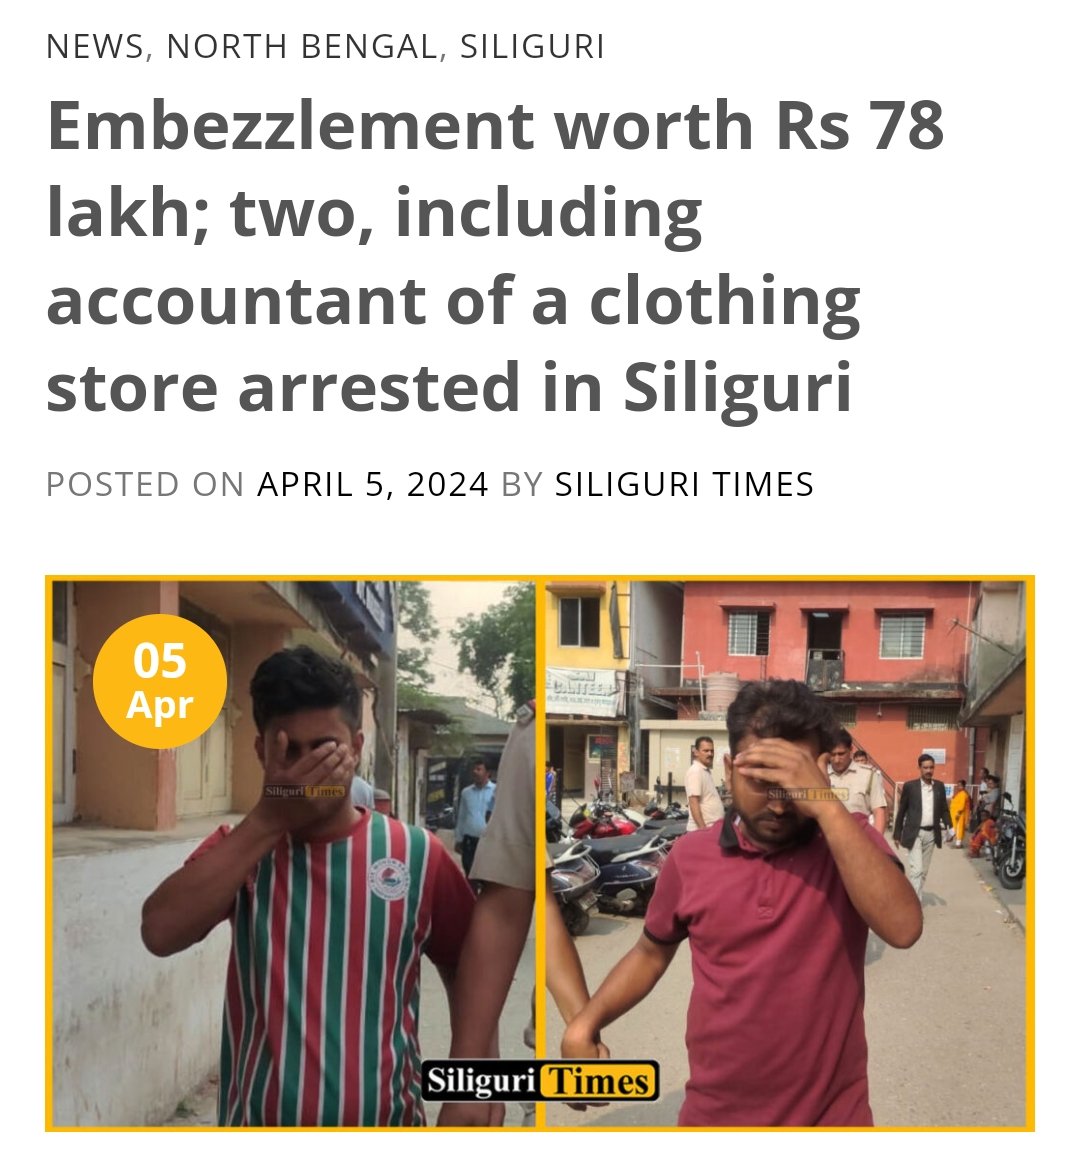 #BREAKING | Mohun Bagan supporter Bikki Choudhary and Piyush Jindal have been arrested for defrauding a renowned clothing store worth 78 lakhs of rupees in Siliguri.

#MohunBagan #Siliguri #MBSG
Report - Siliguri Times